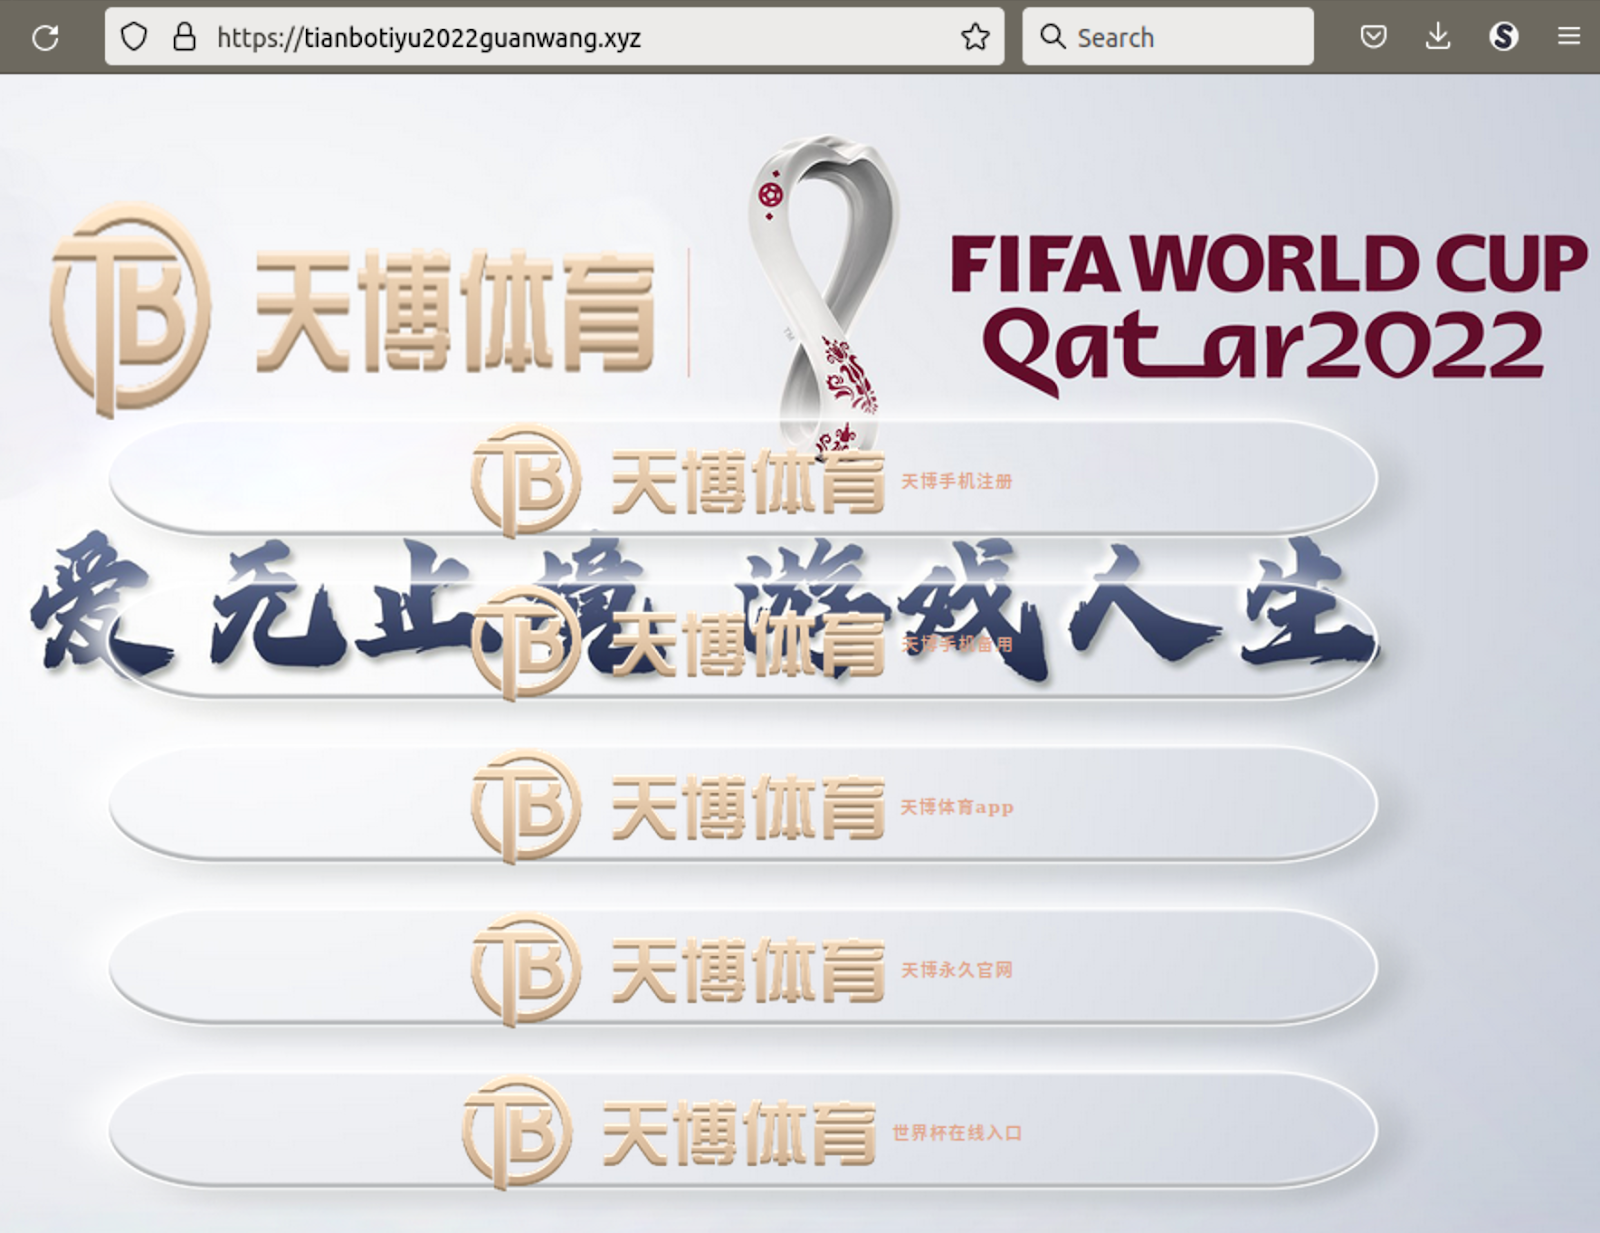 World Cup themed intermediary redirect for chinese gambling SEO spam